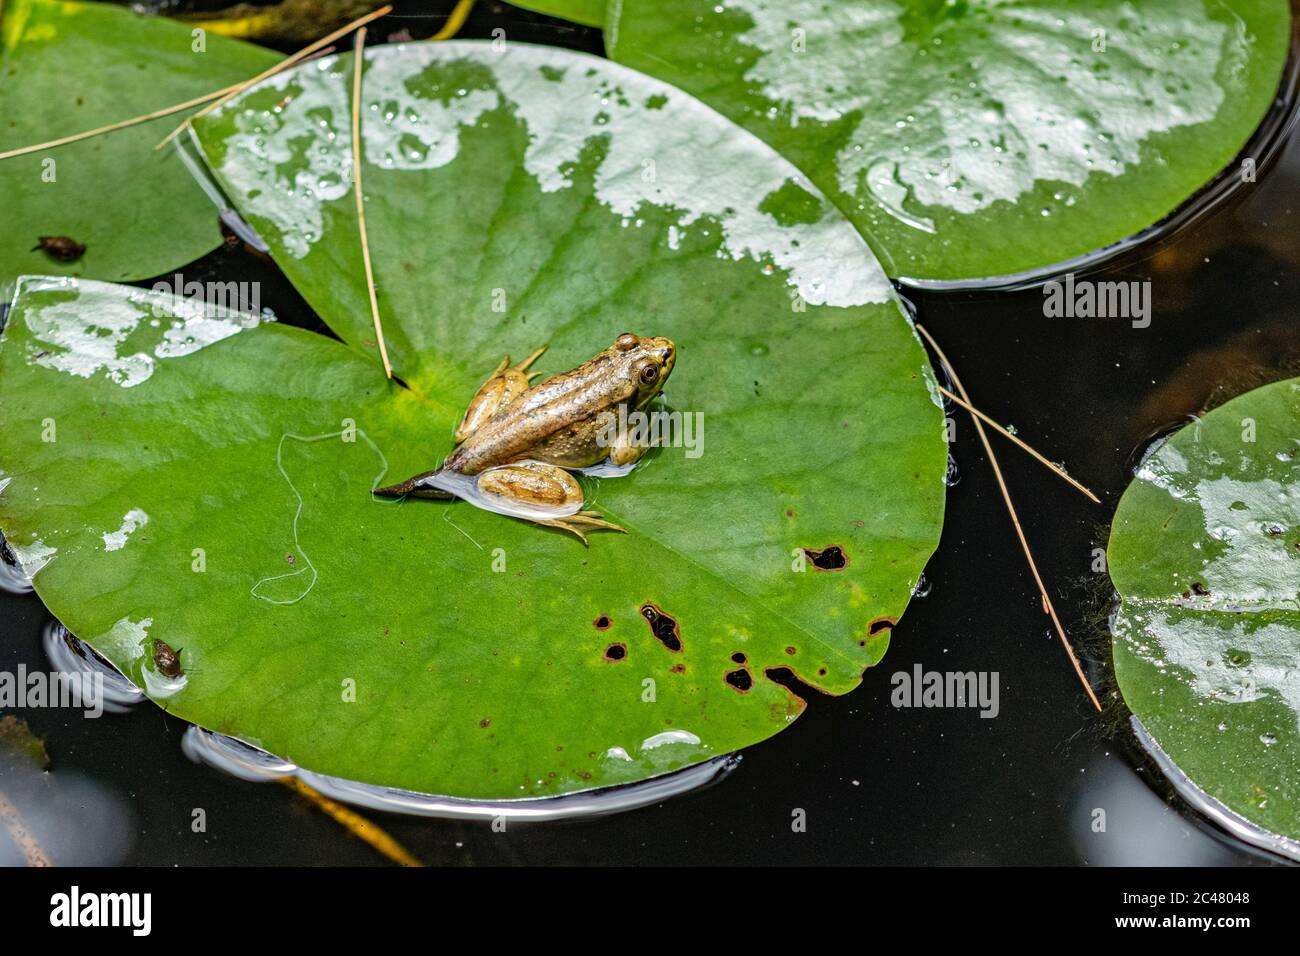 A green frog tadploe with legs and a tail Stock Photo